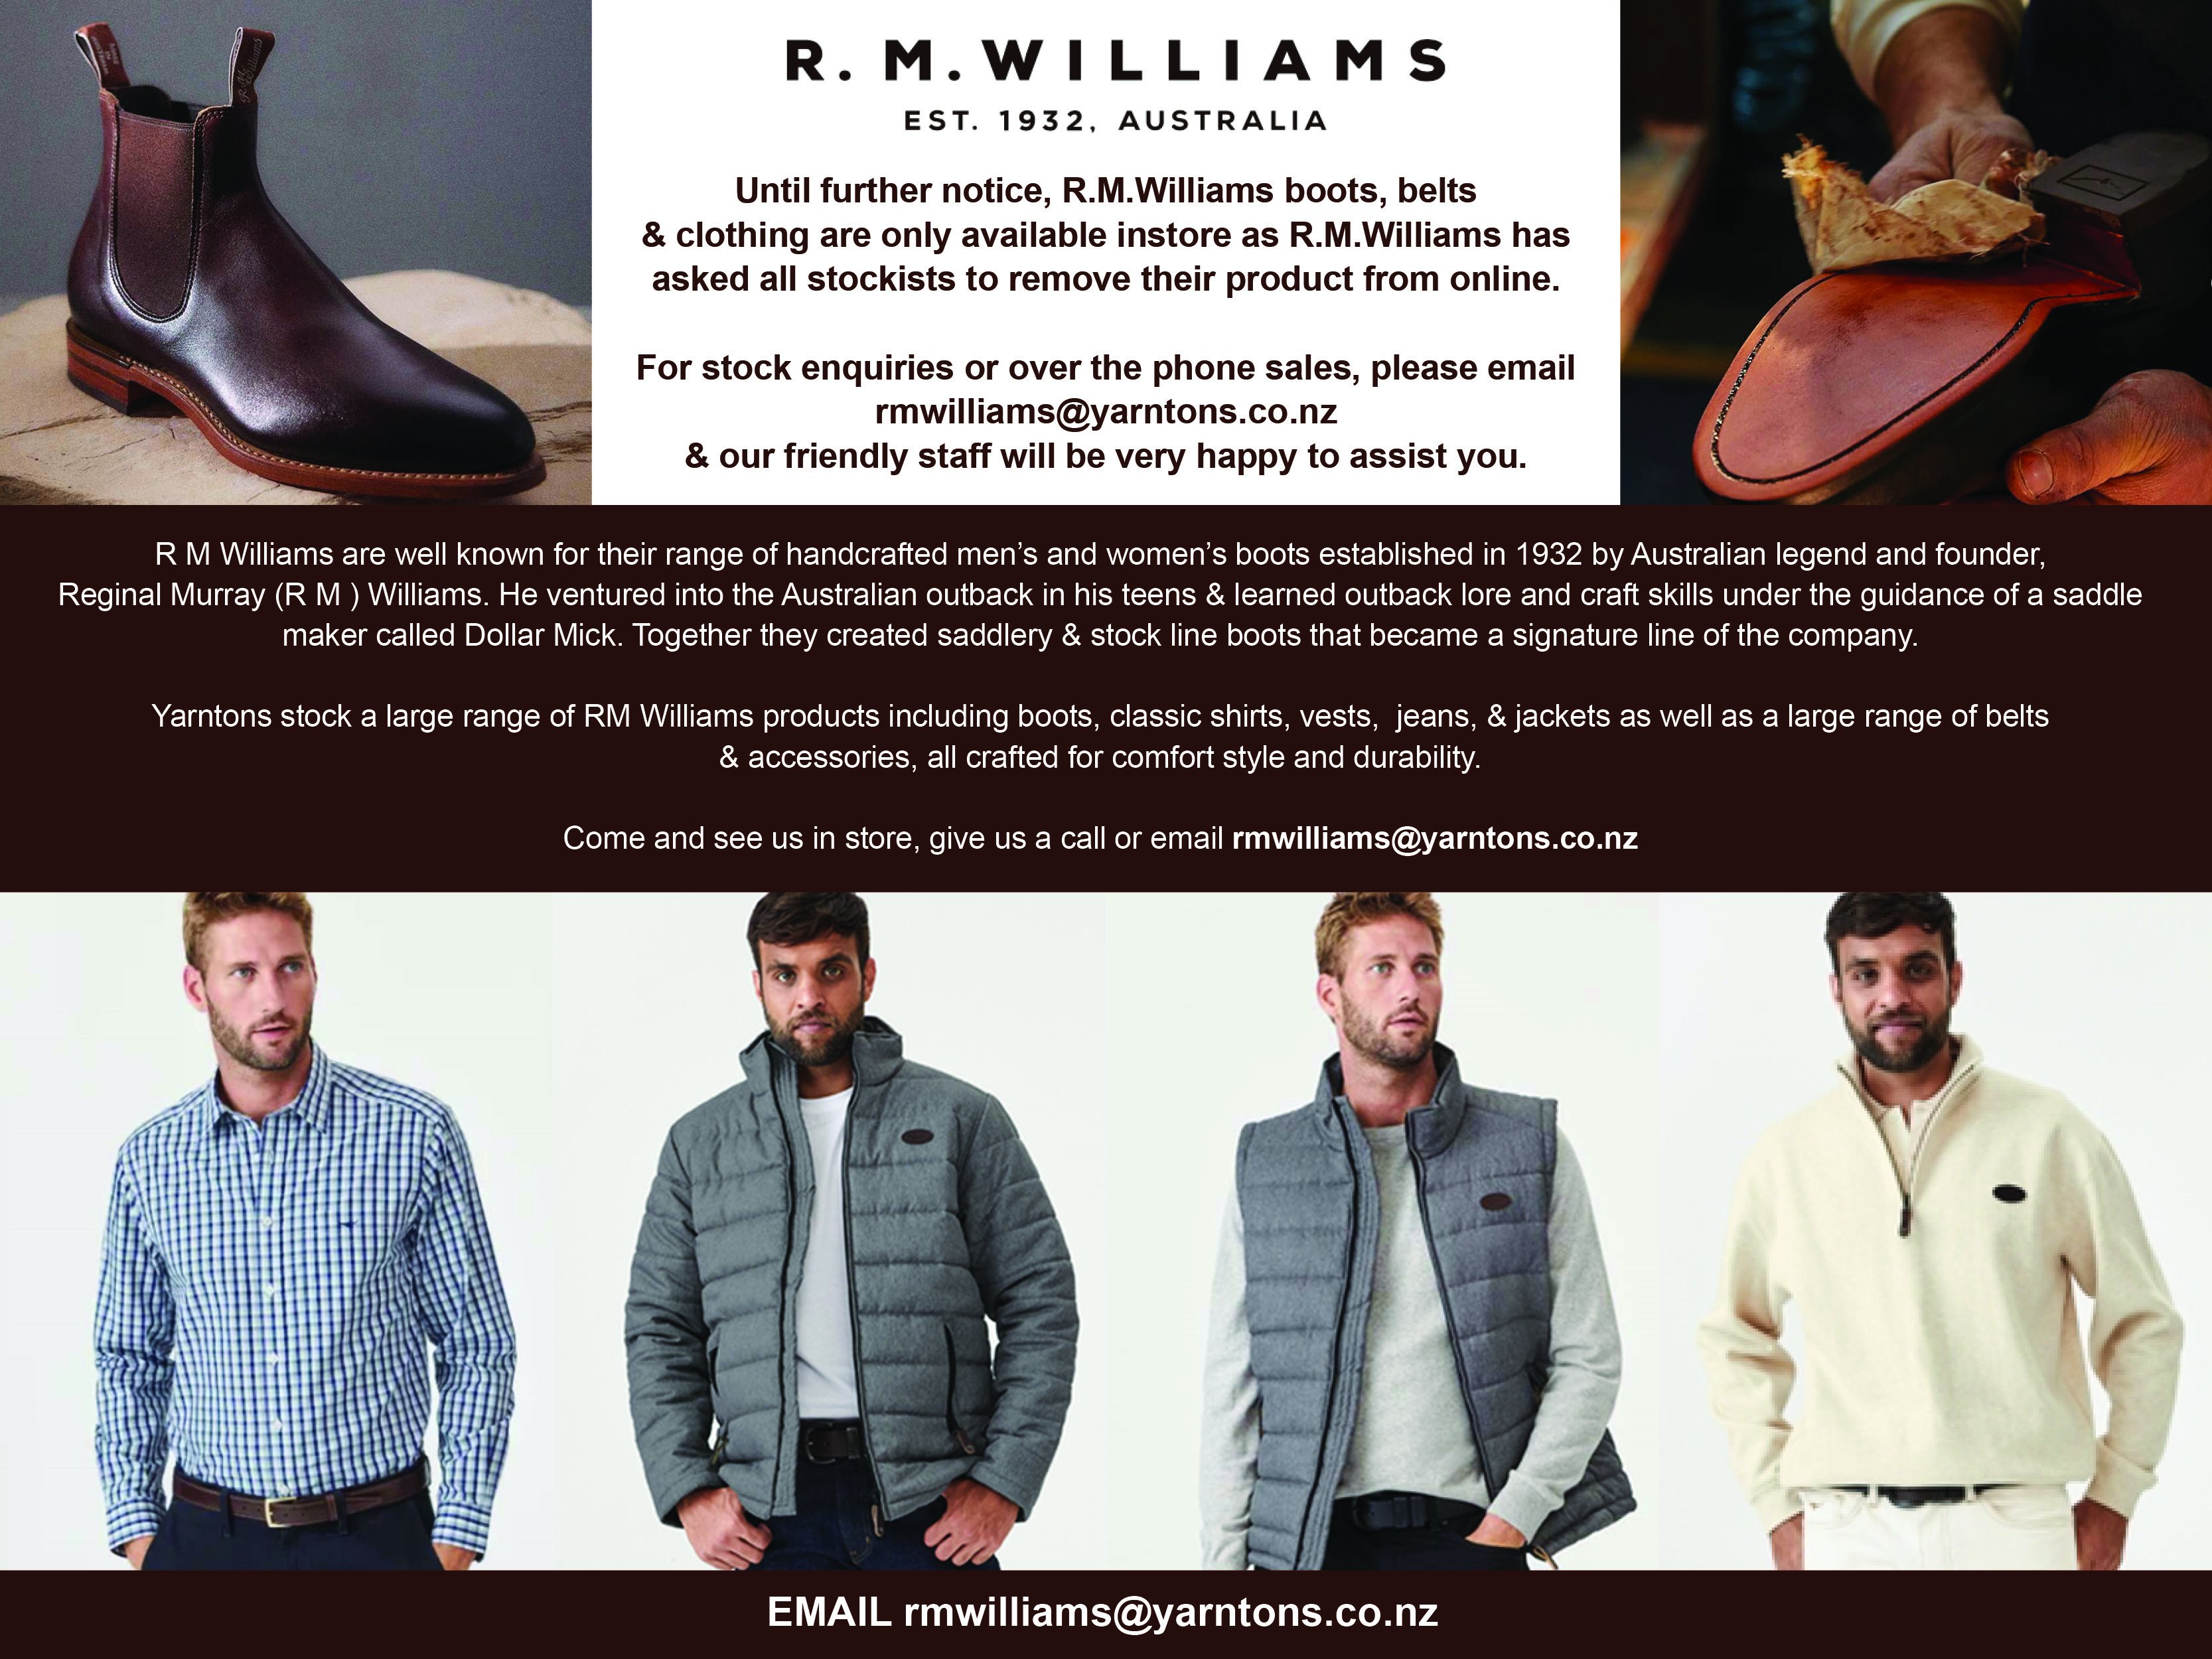 R.M. Williams products for sale